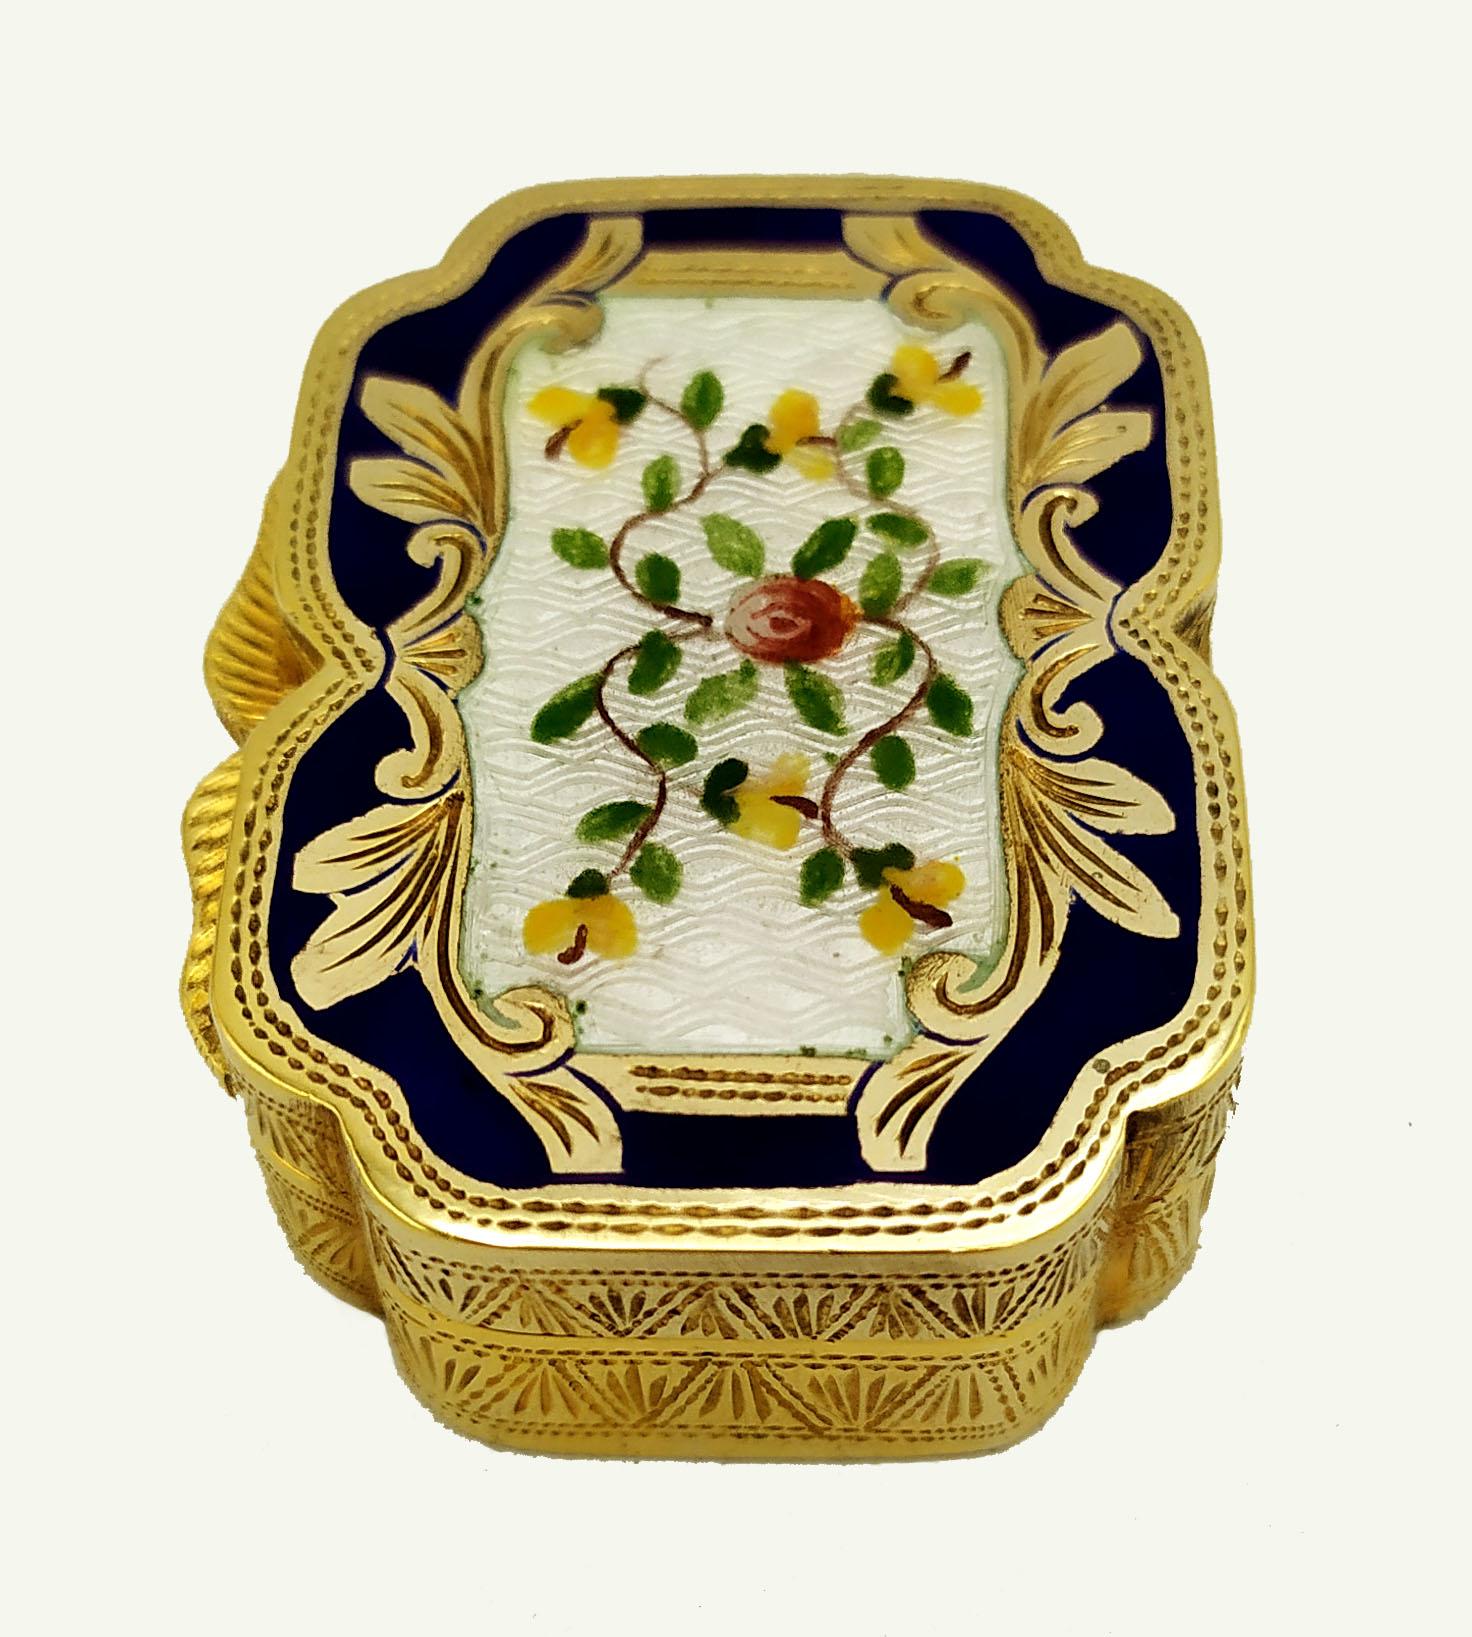 Pill Box Silver is in 925/1000 sterling silver gold plated 24 carats.
Pill Box Silver is with translucent fired enamels on guilloché.
Pill Box Silver has a hand-painted floral miniature, with fine hand engravings.
Pill Box Silver Sterling is in